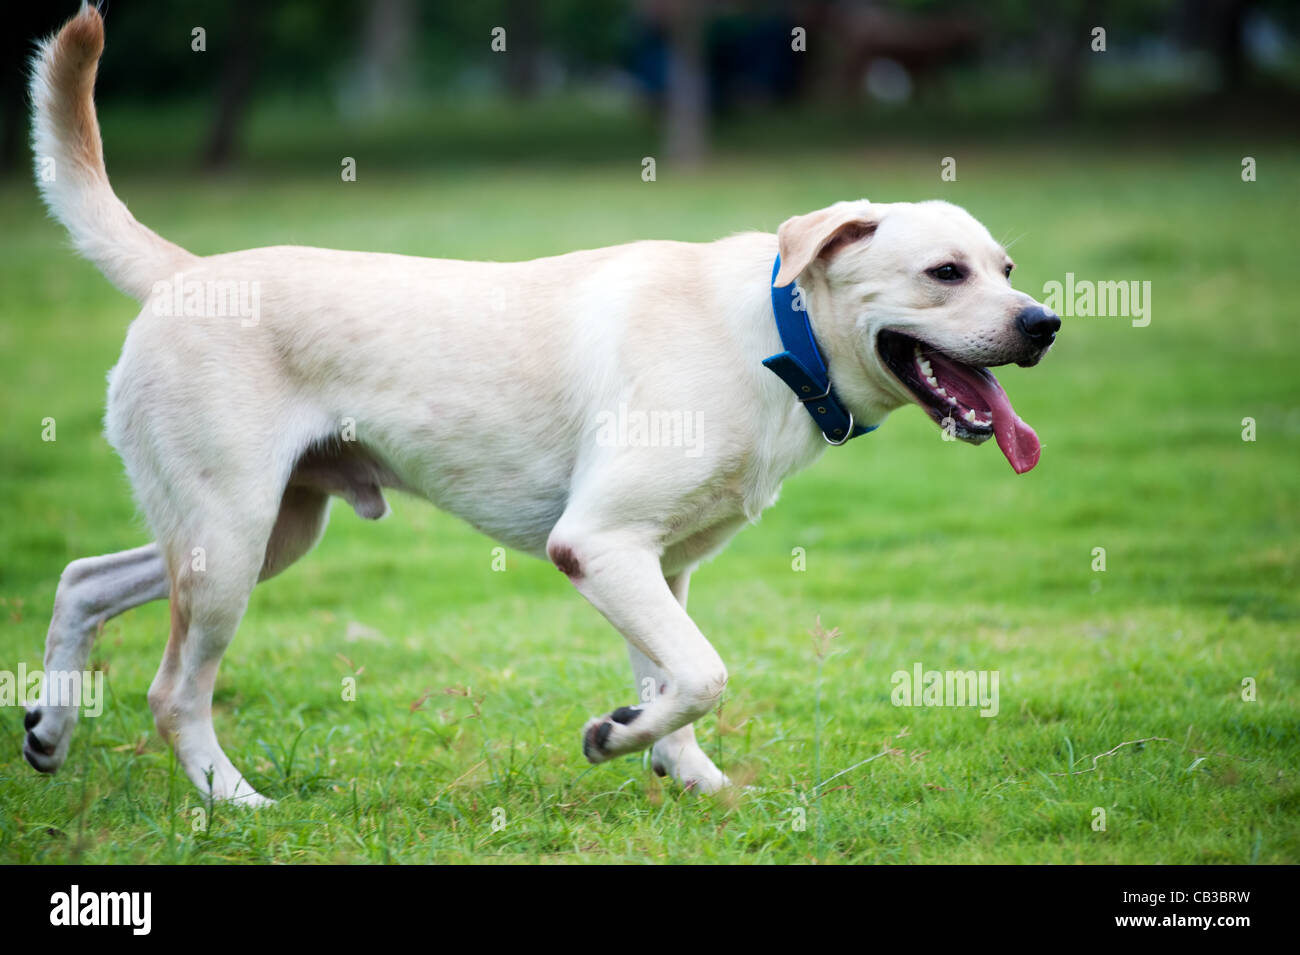 White Labrador dog running on the lawn Stock Photo